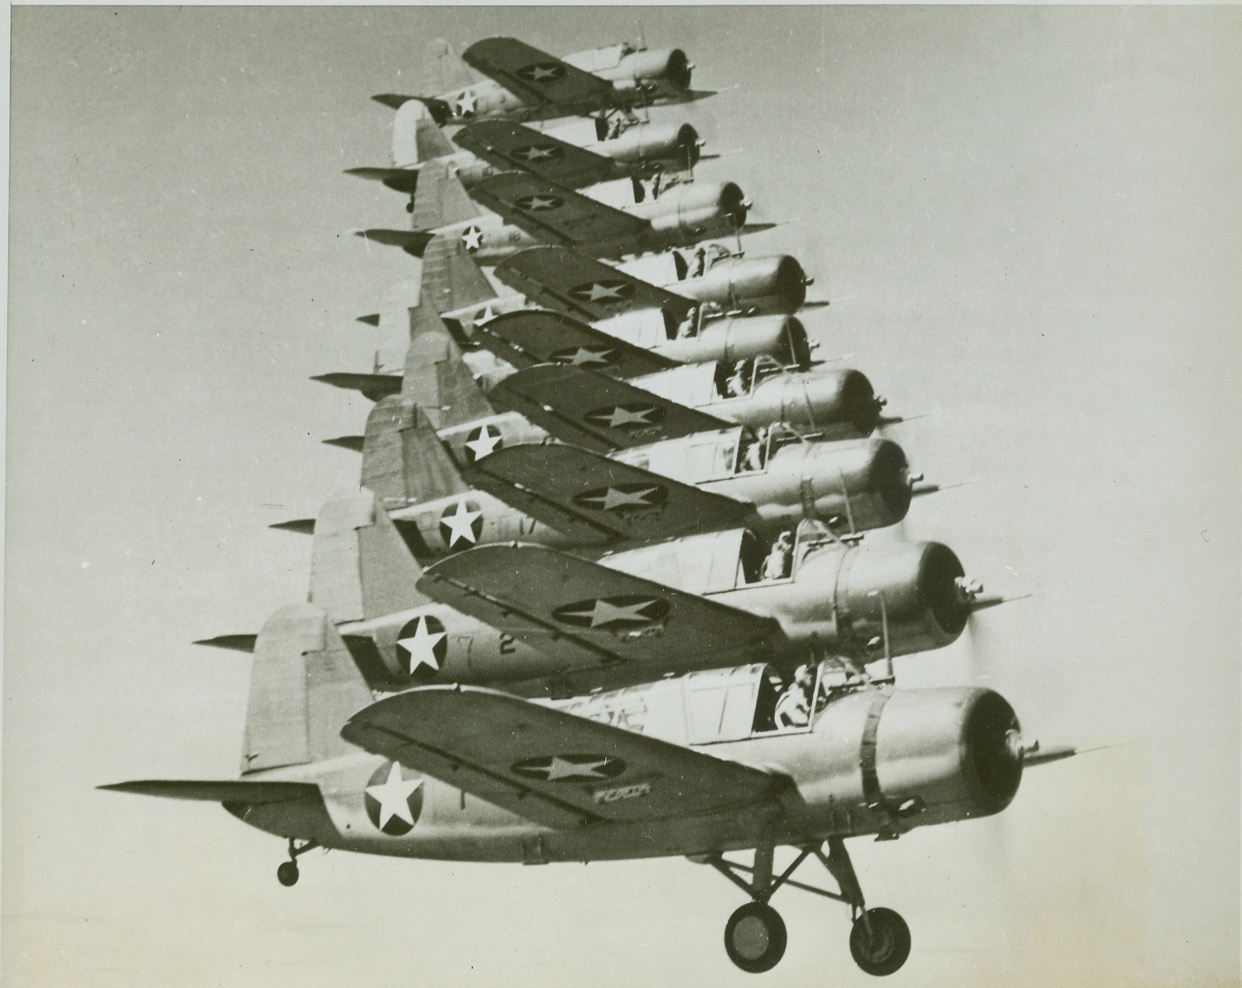 Flying Staircase, 11/9/1943. Nine Kingfisher scout planes (OS2U) of the Navy form a flying “staircase” by flying almost “cheek-to-cheek” during aerial maneuvers. Precision flying is almost matter of fact to Navy fliers.  Credit: Official U.S. Navy photo from ACME;